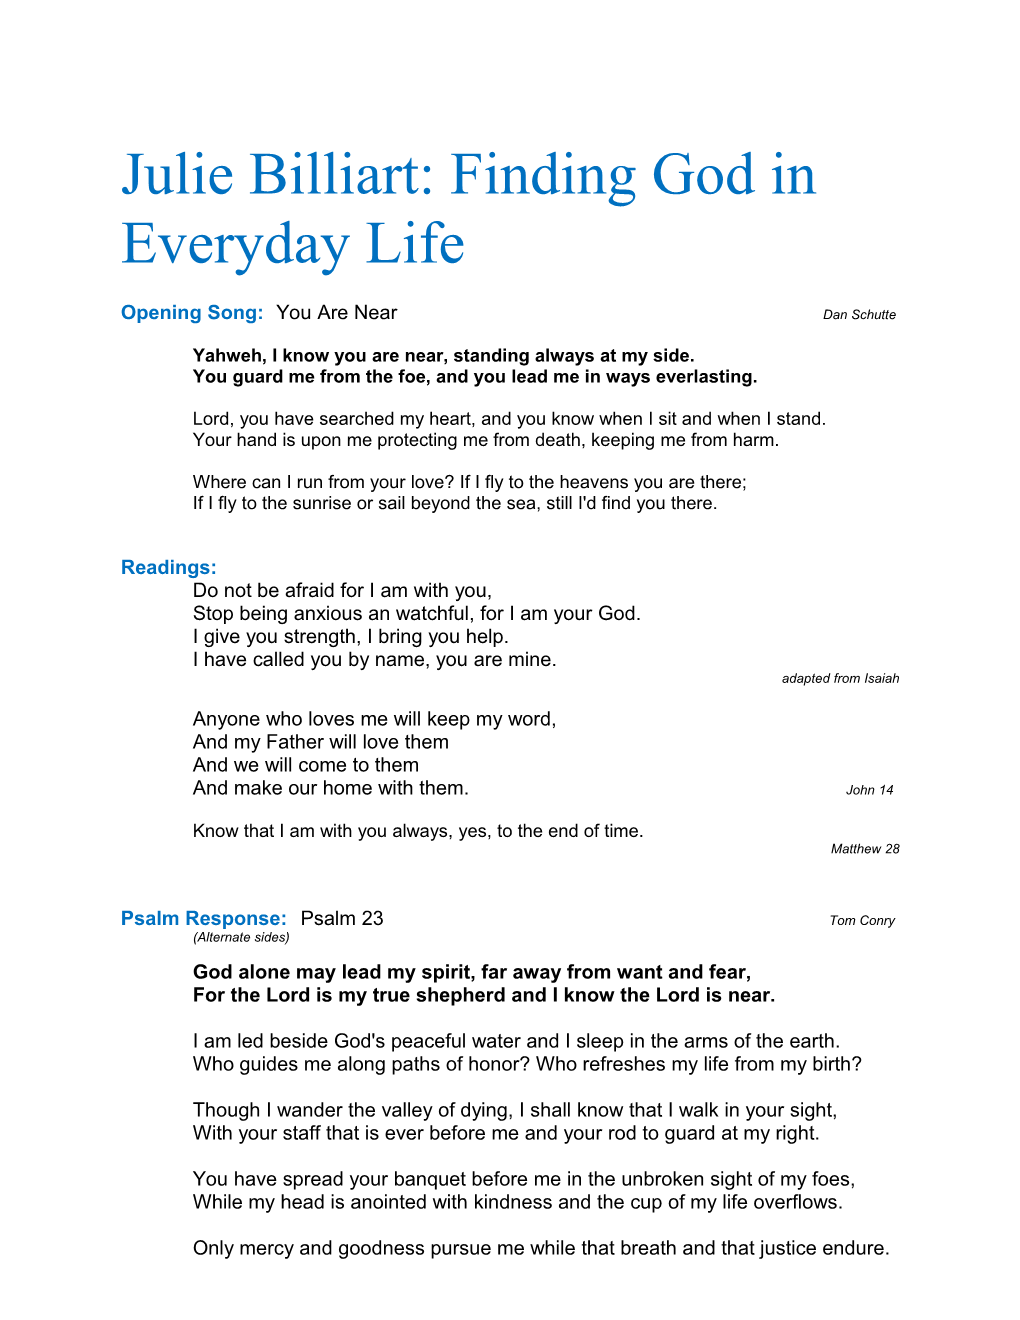 Julie Billiart; Woman Finding God in Everyday Life